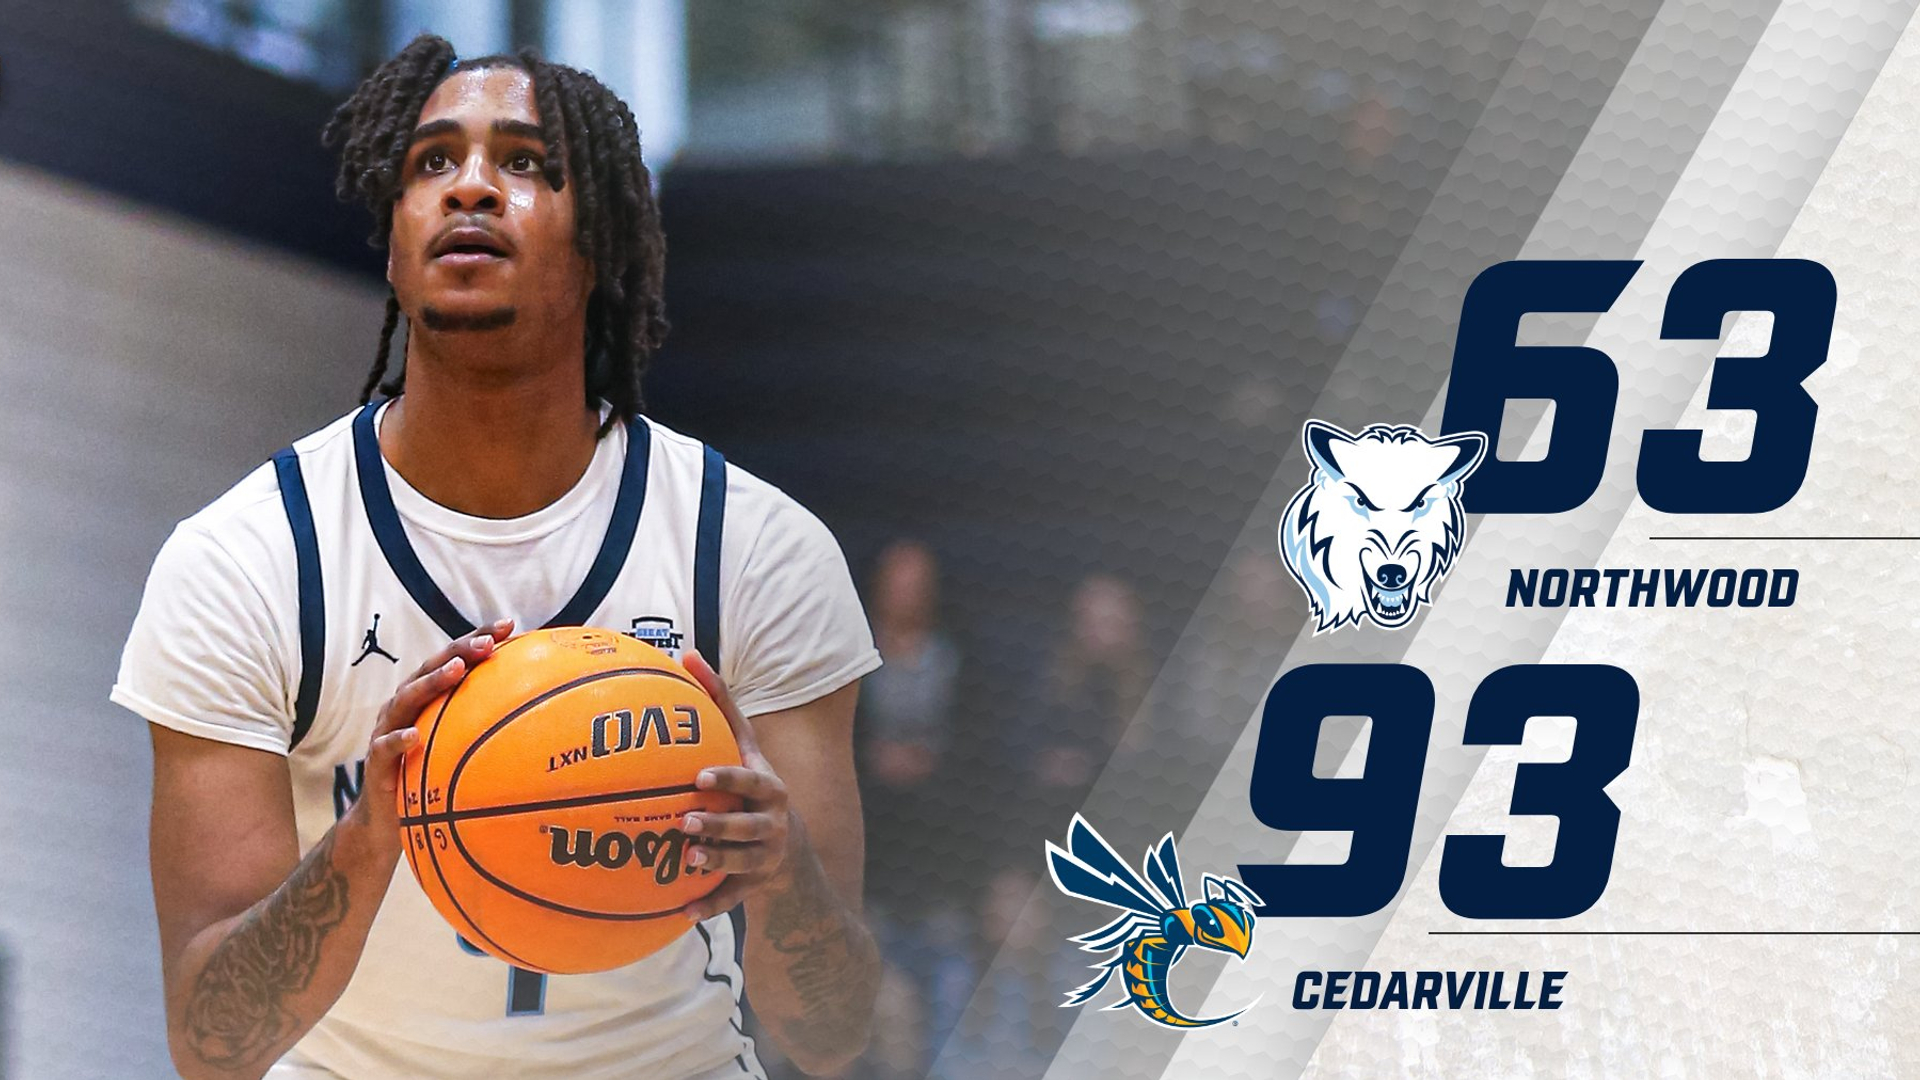 Men's Basketball Loses To G-MAC Leading Cedarville 93-63